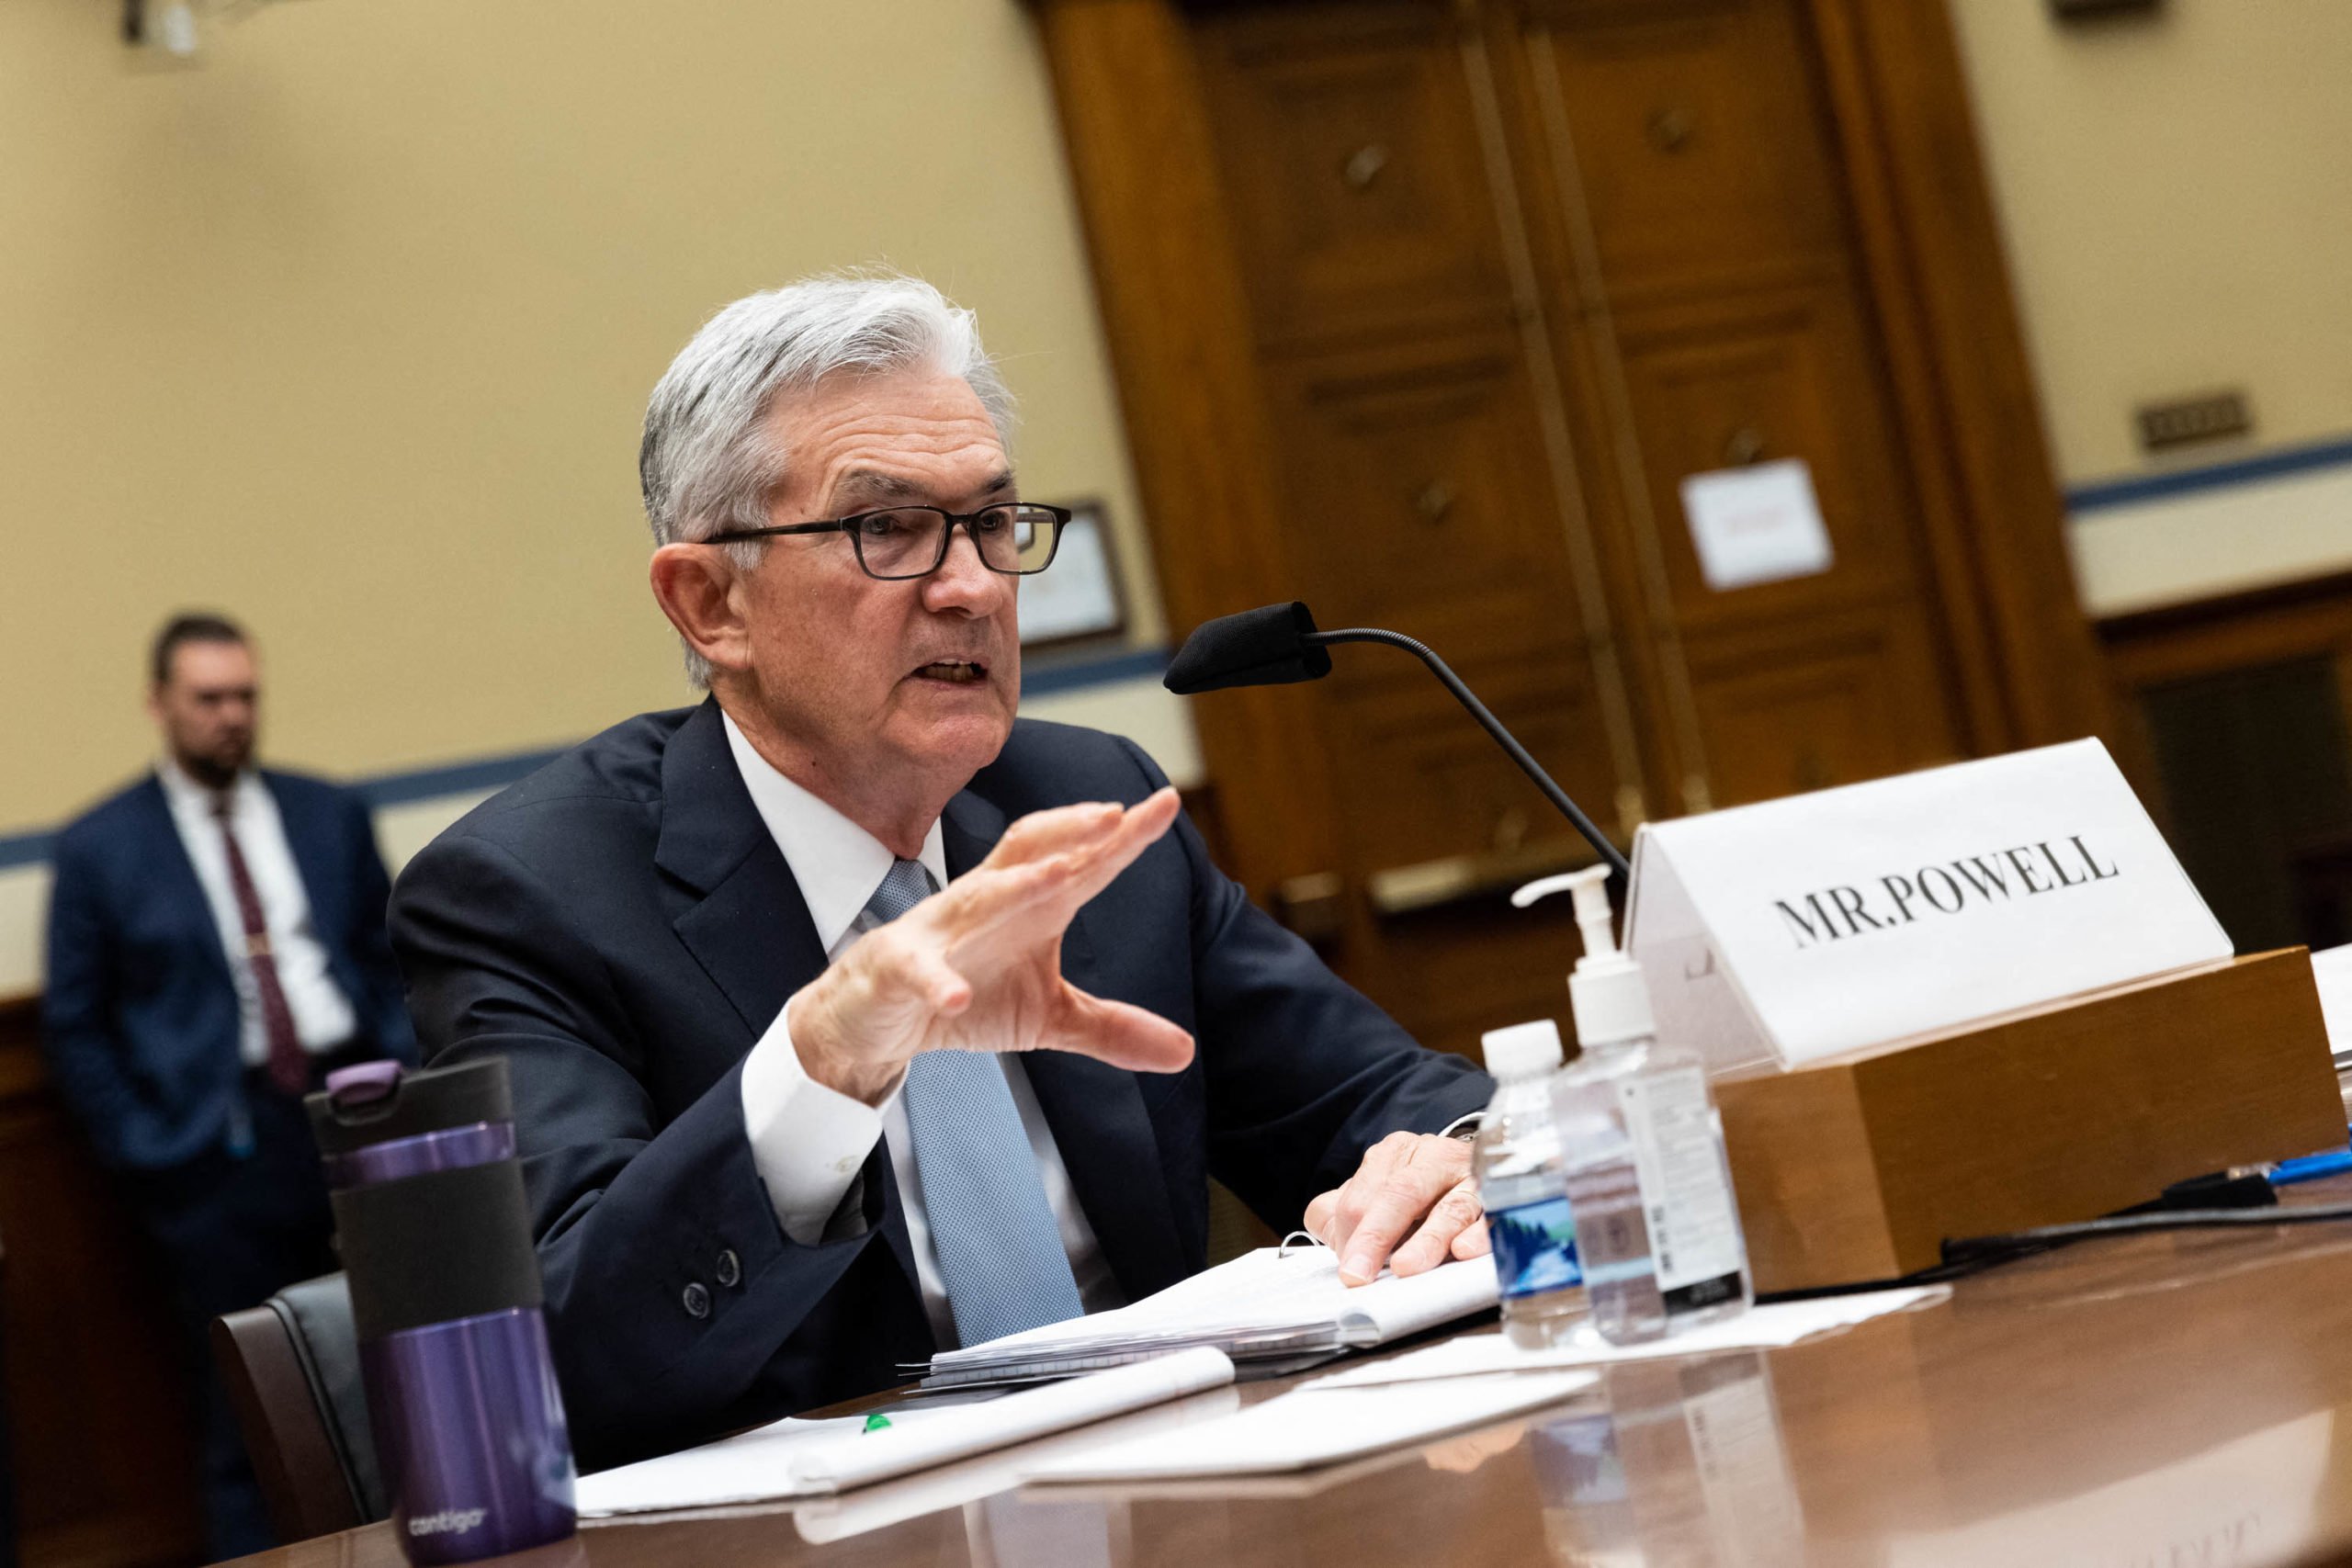 Federal Reserve Chairman Jerome Powell testifies during a House hearing on Tuesday. (Graeme Jennings/Pool/AFP via Getty Images)